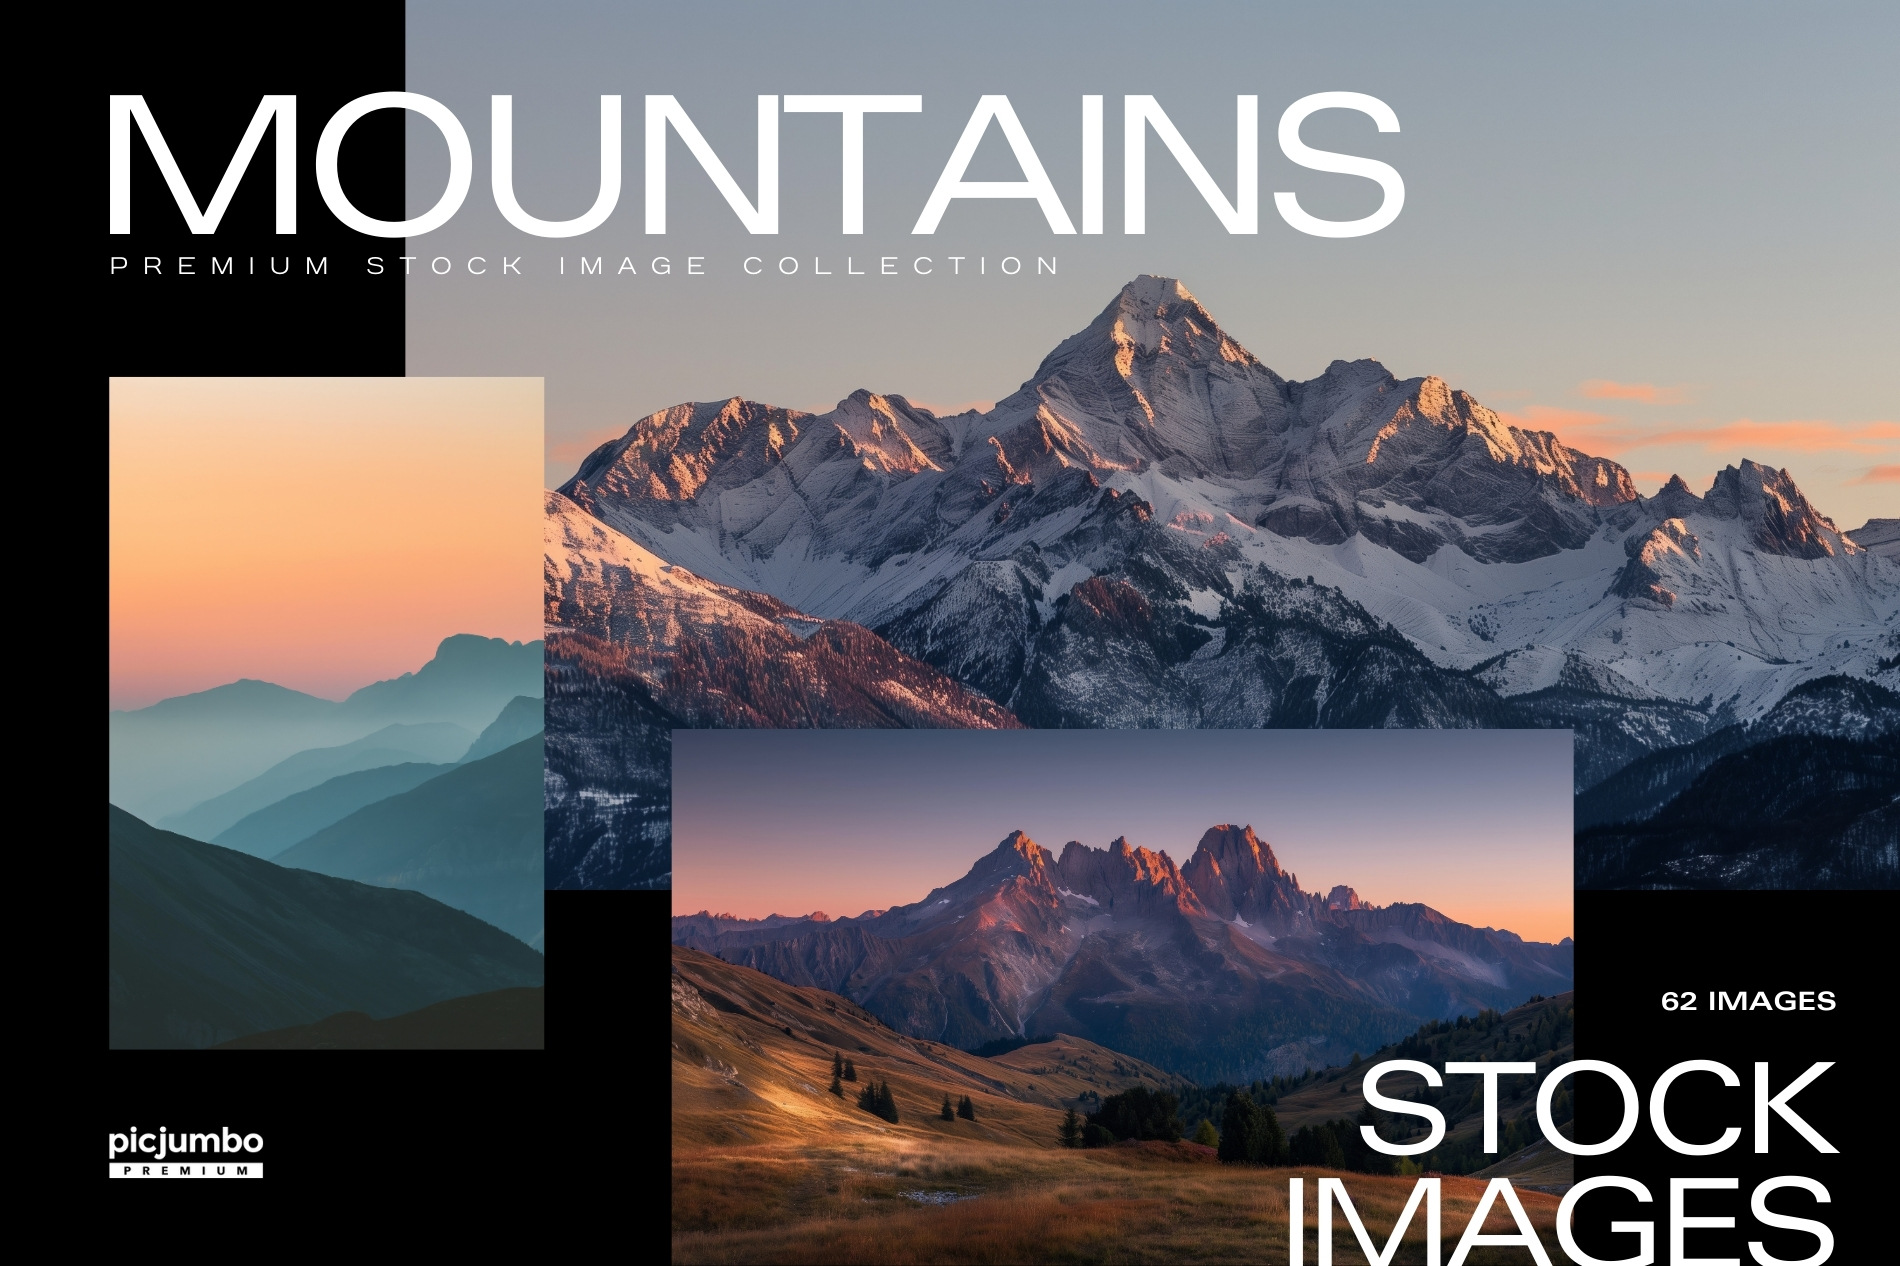 Download hi-res stock photos from our Mountains PREMIUM Collection!